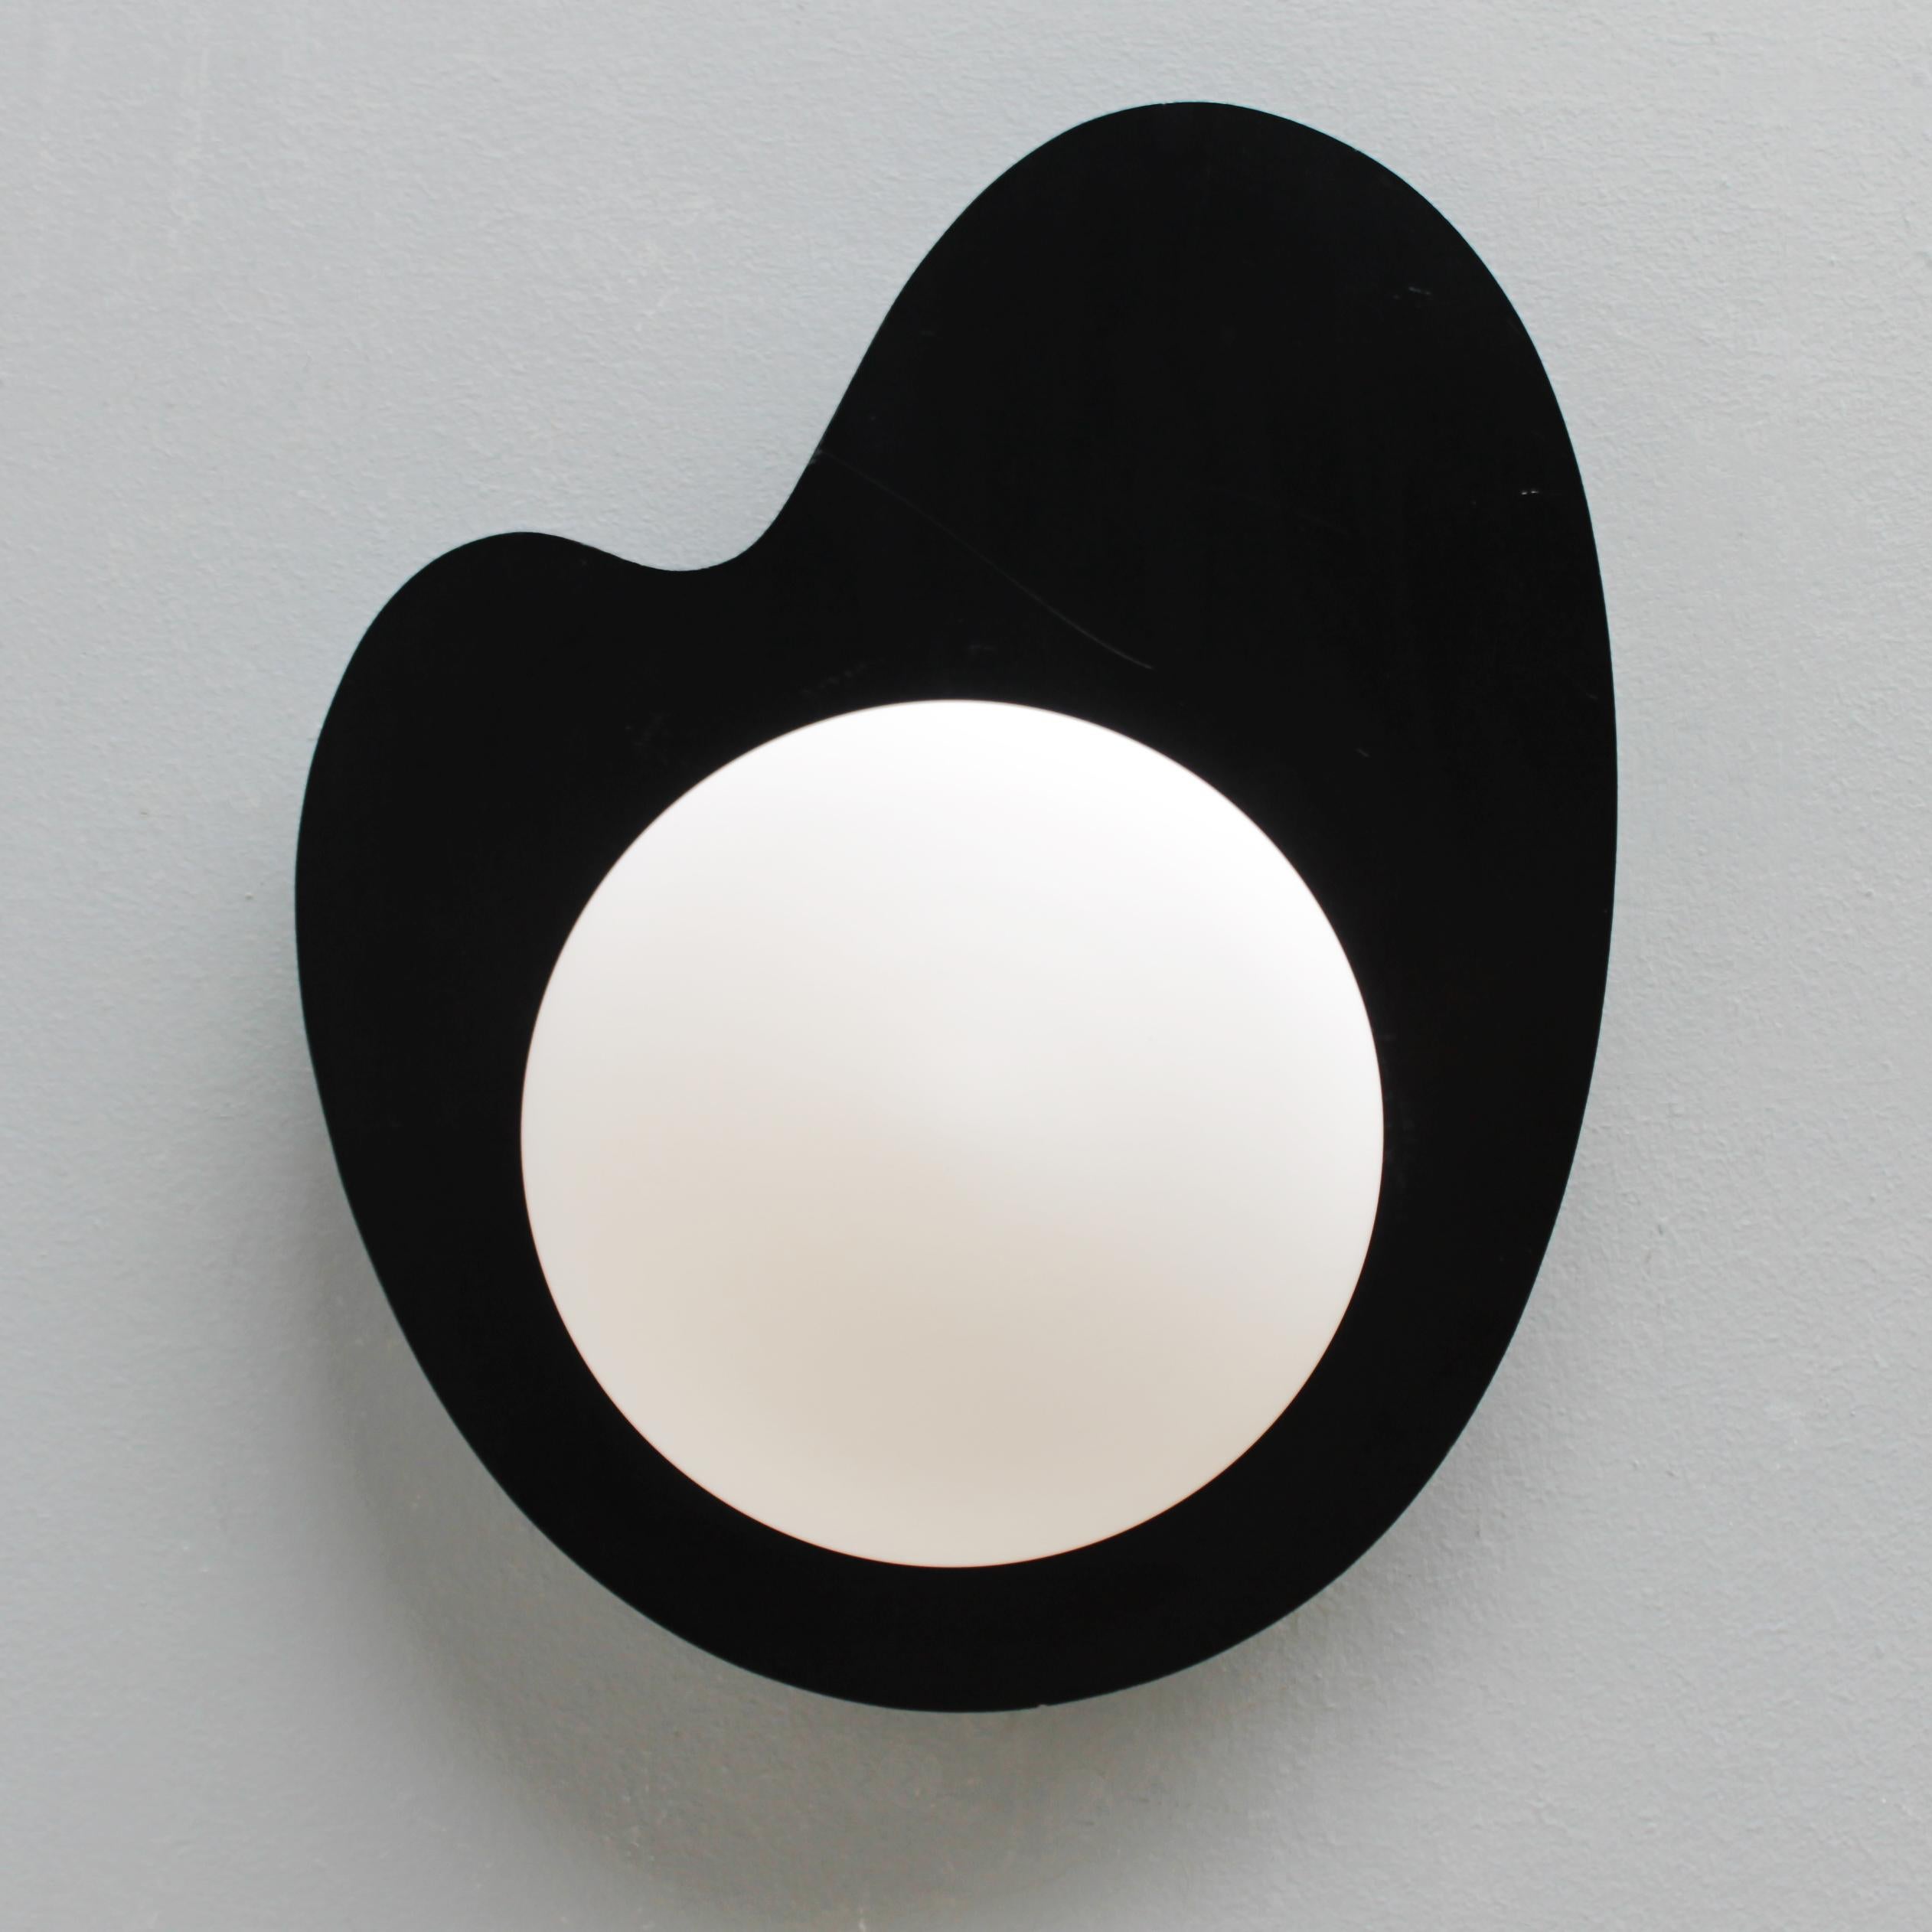 Very rare modernist wall lamp by Kaiser Leuchten, Germany. Period 1950-1960. 
Opaline glass hemisphere on an amorphous black plywood background. Marked with a label.
Dimensions: Height 17.3 in. (44 cm), depth 5.9 in. (10 cm) and width 13.8 inches